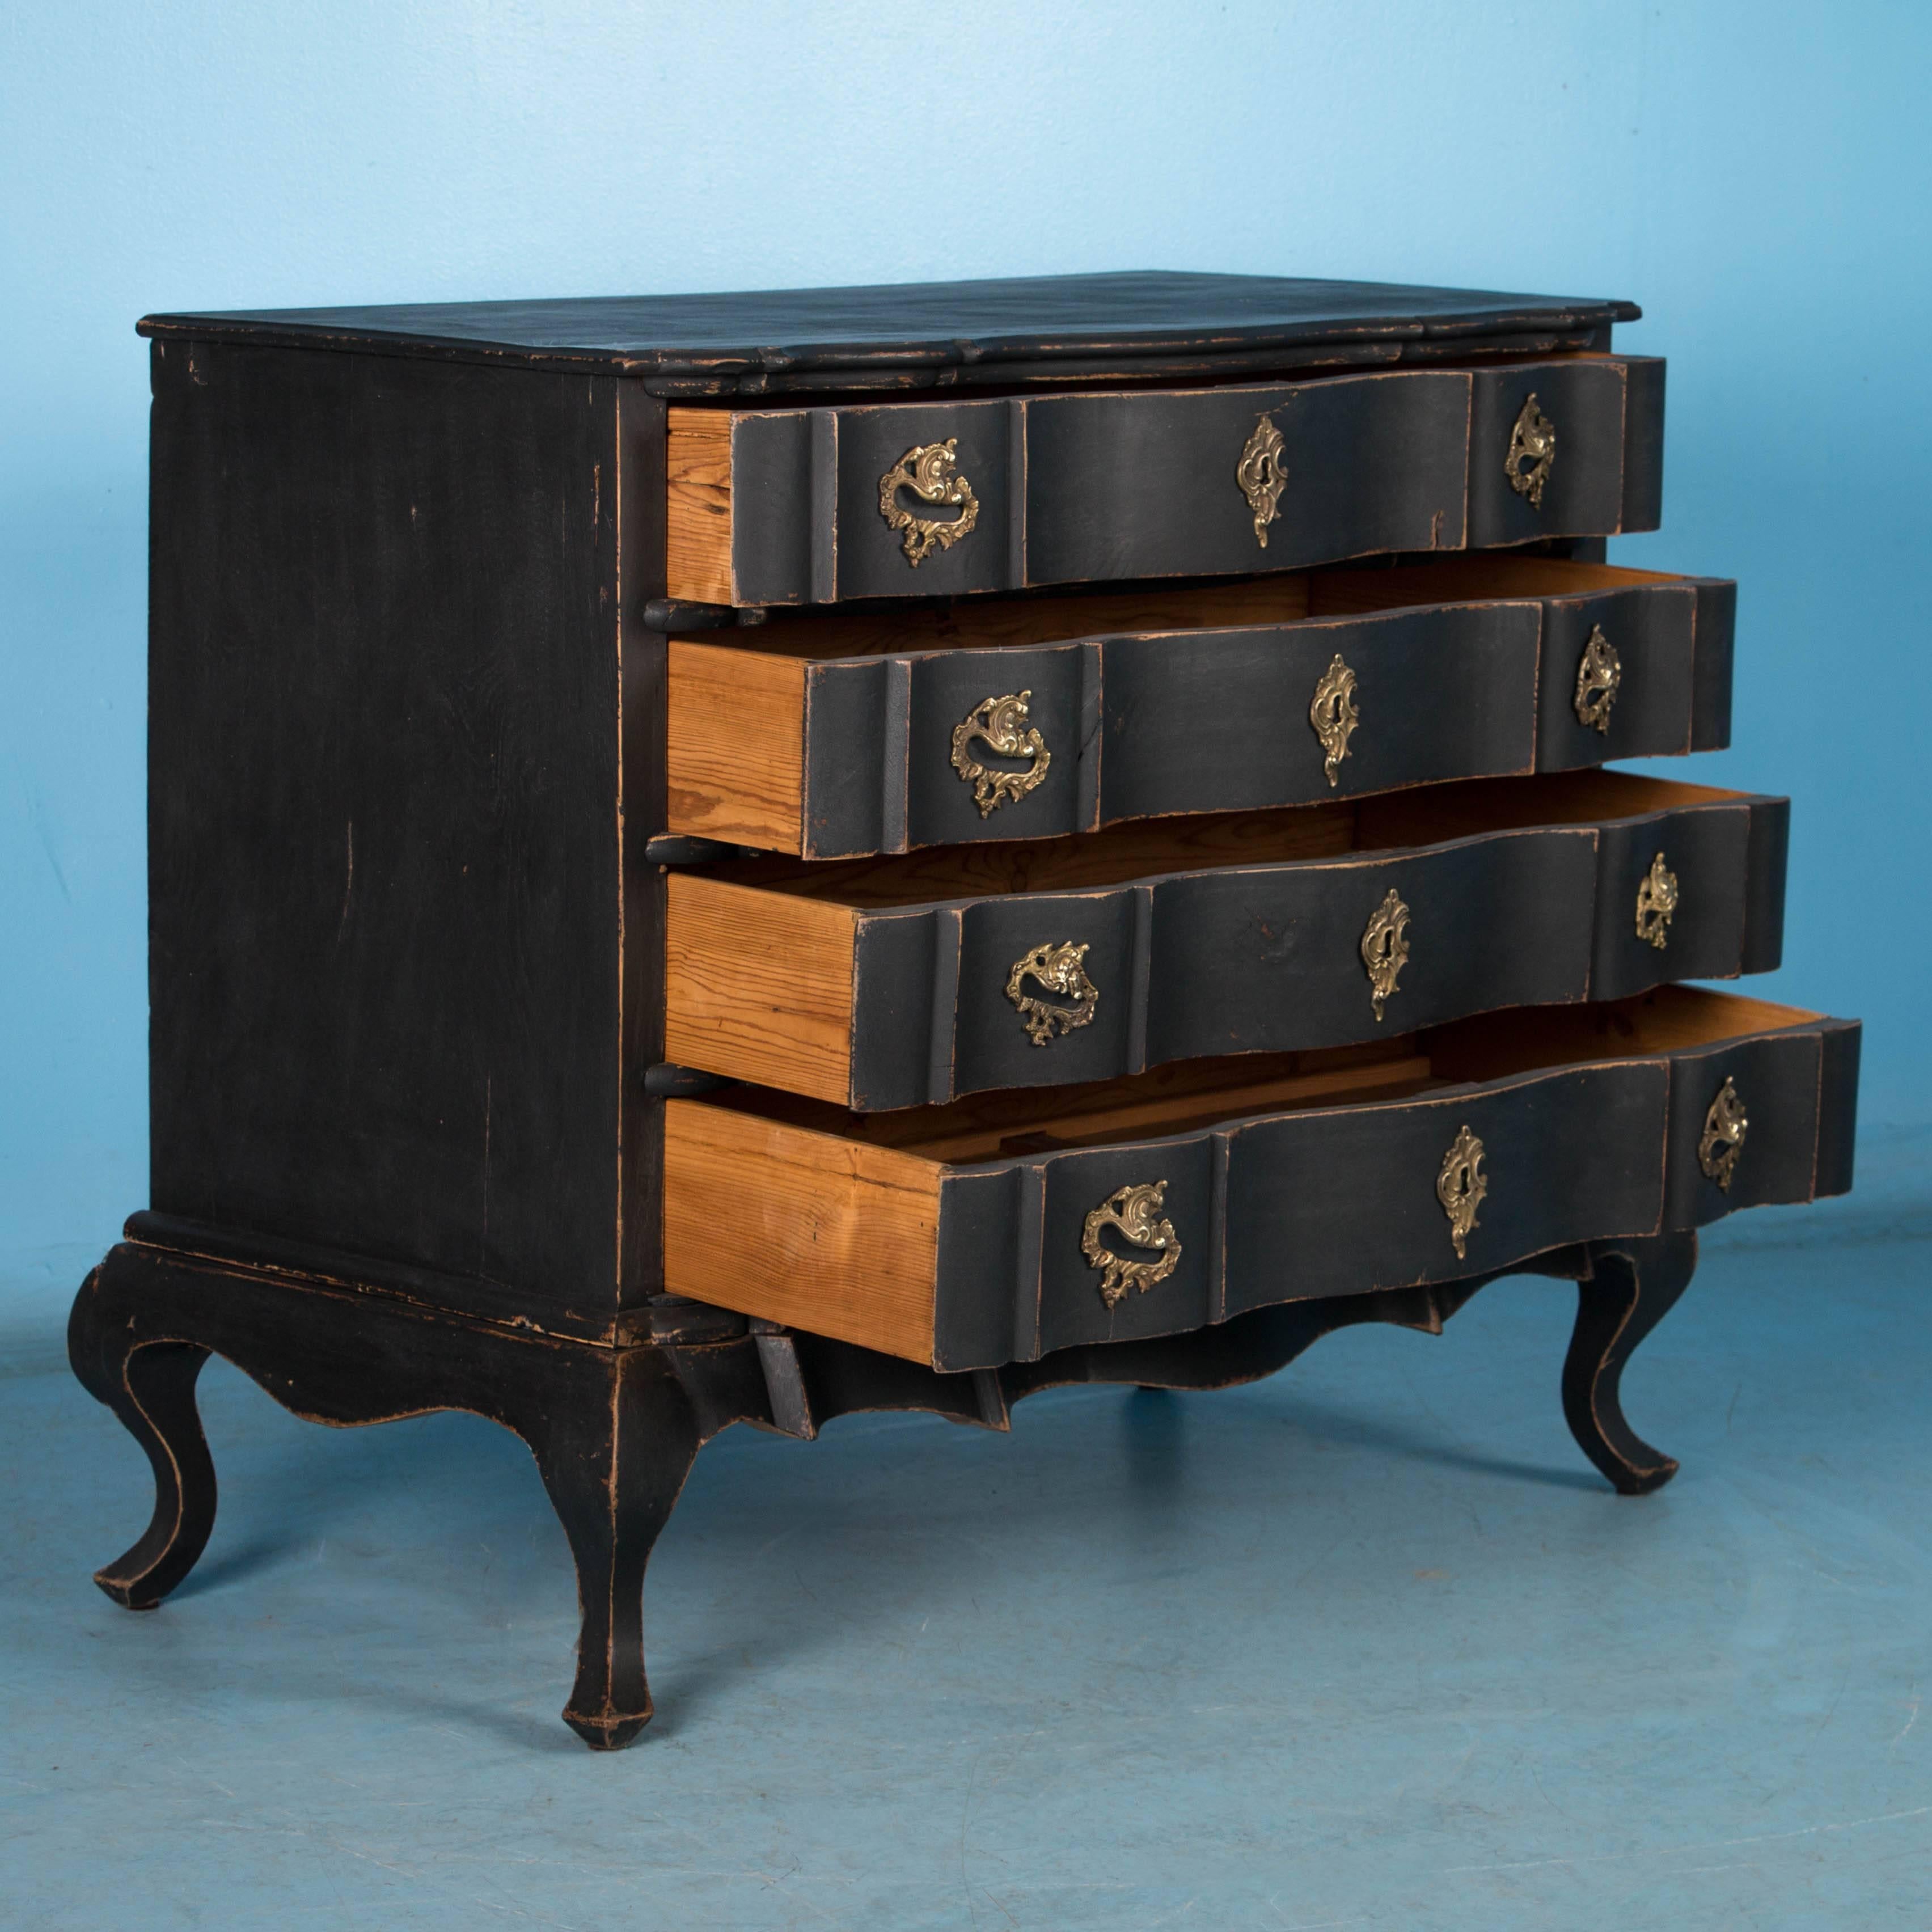  The strong visual appeal of this handsome Danish chest of drawers is due to the new, lightly worn black chalk paint that accents the contours of the top and each of the serpentine drawer fronts. Where the paint has been gently scraped, the rich